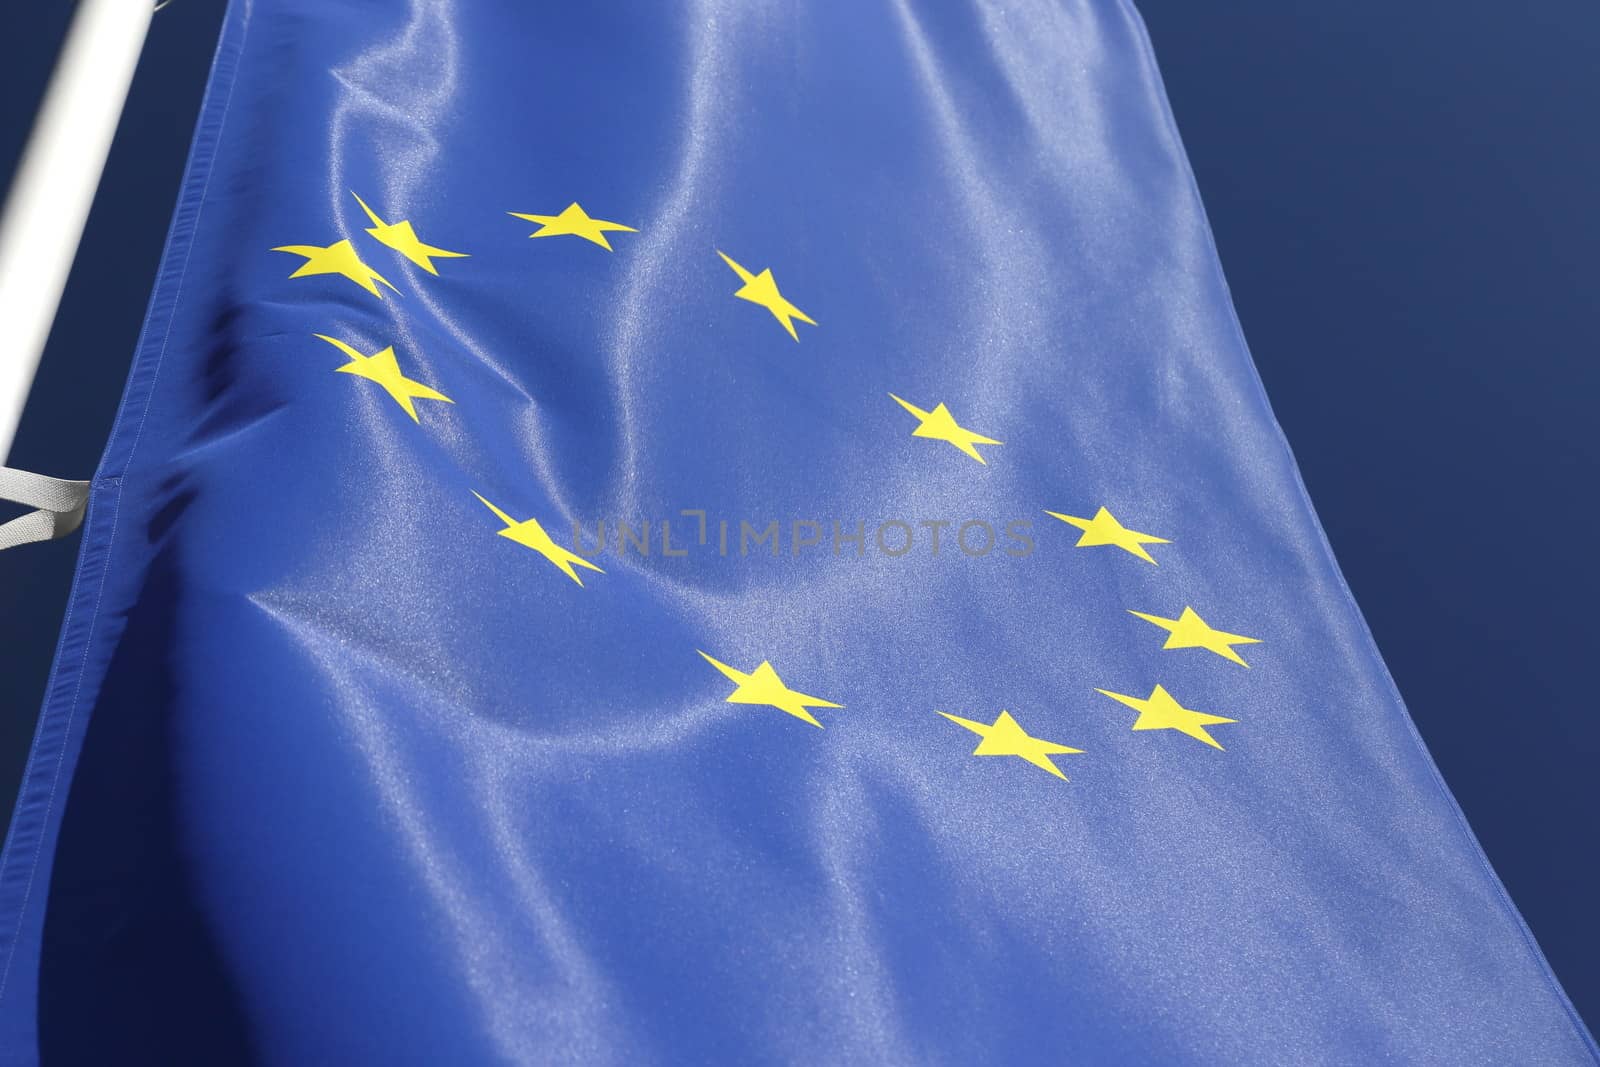 The flag of European Union with golden stars